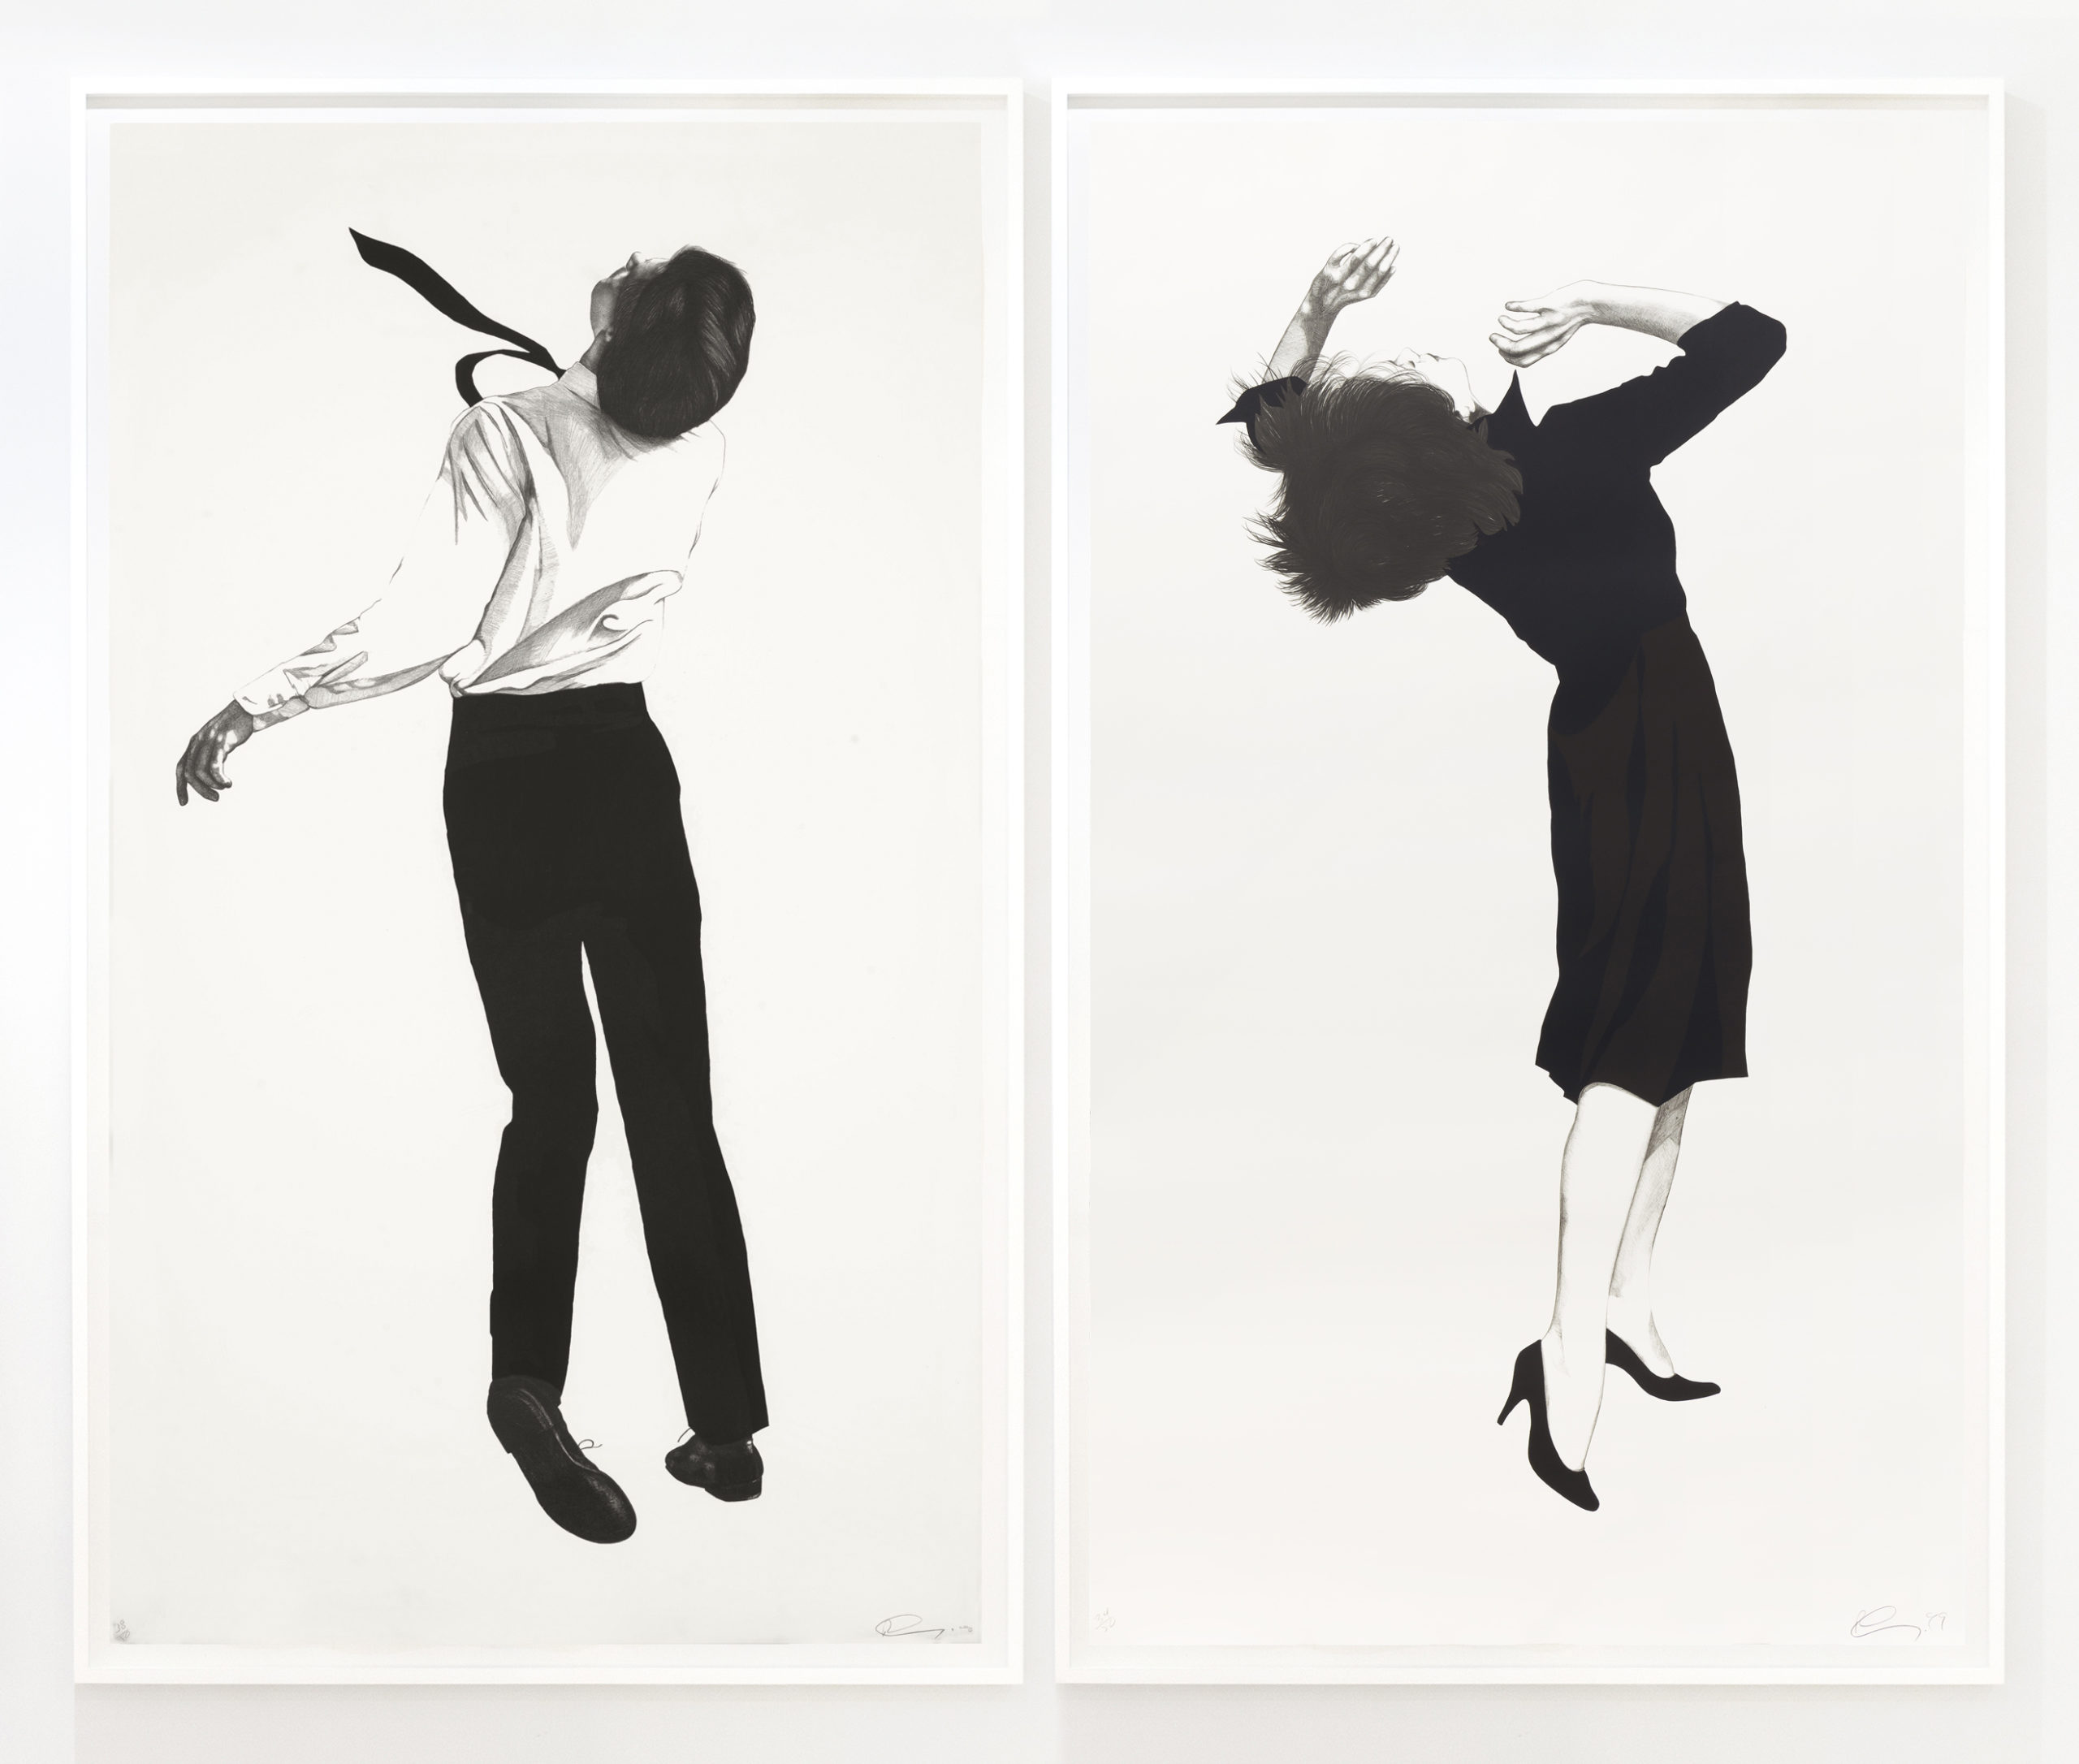 Robert Longo Joseph and Ellen from Men in the Cities, 1999 Pair of two lithographs Image Dimensions: 60 x 25 1/2 inches (152.4 x 64.8 cm) each Paper Dimensions: 70 x 40 inches (177.8 x 101.6 cm) each Edition of 50